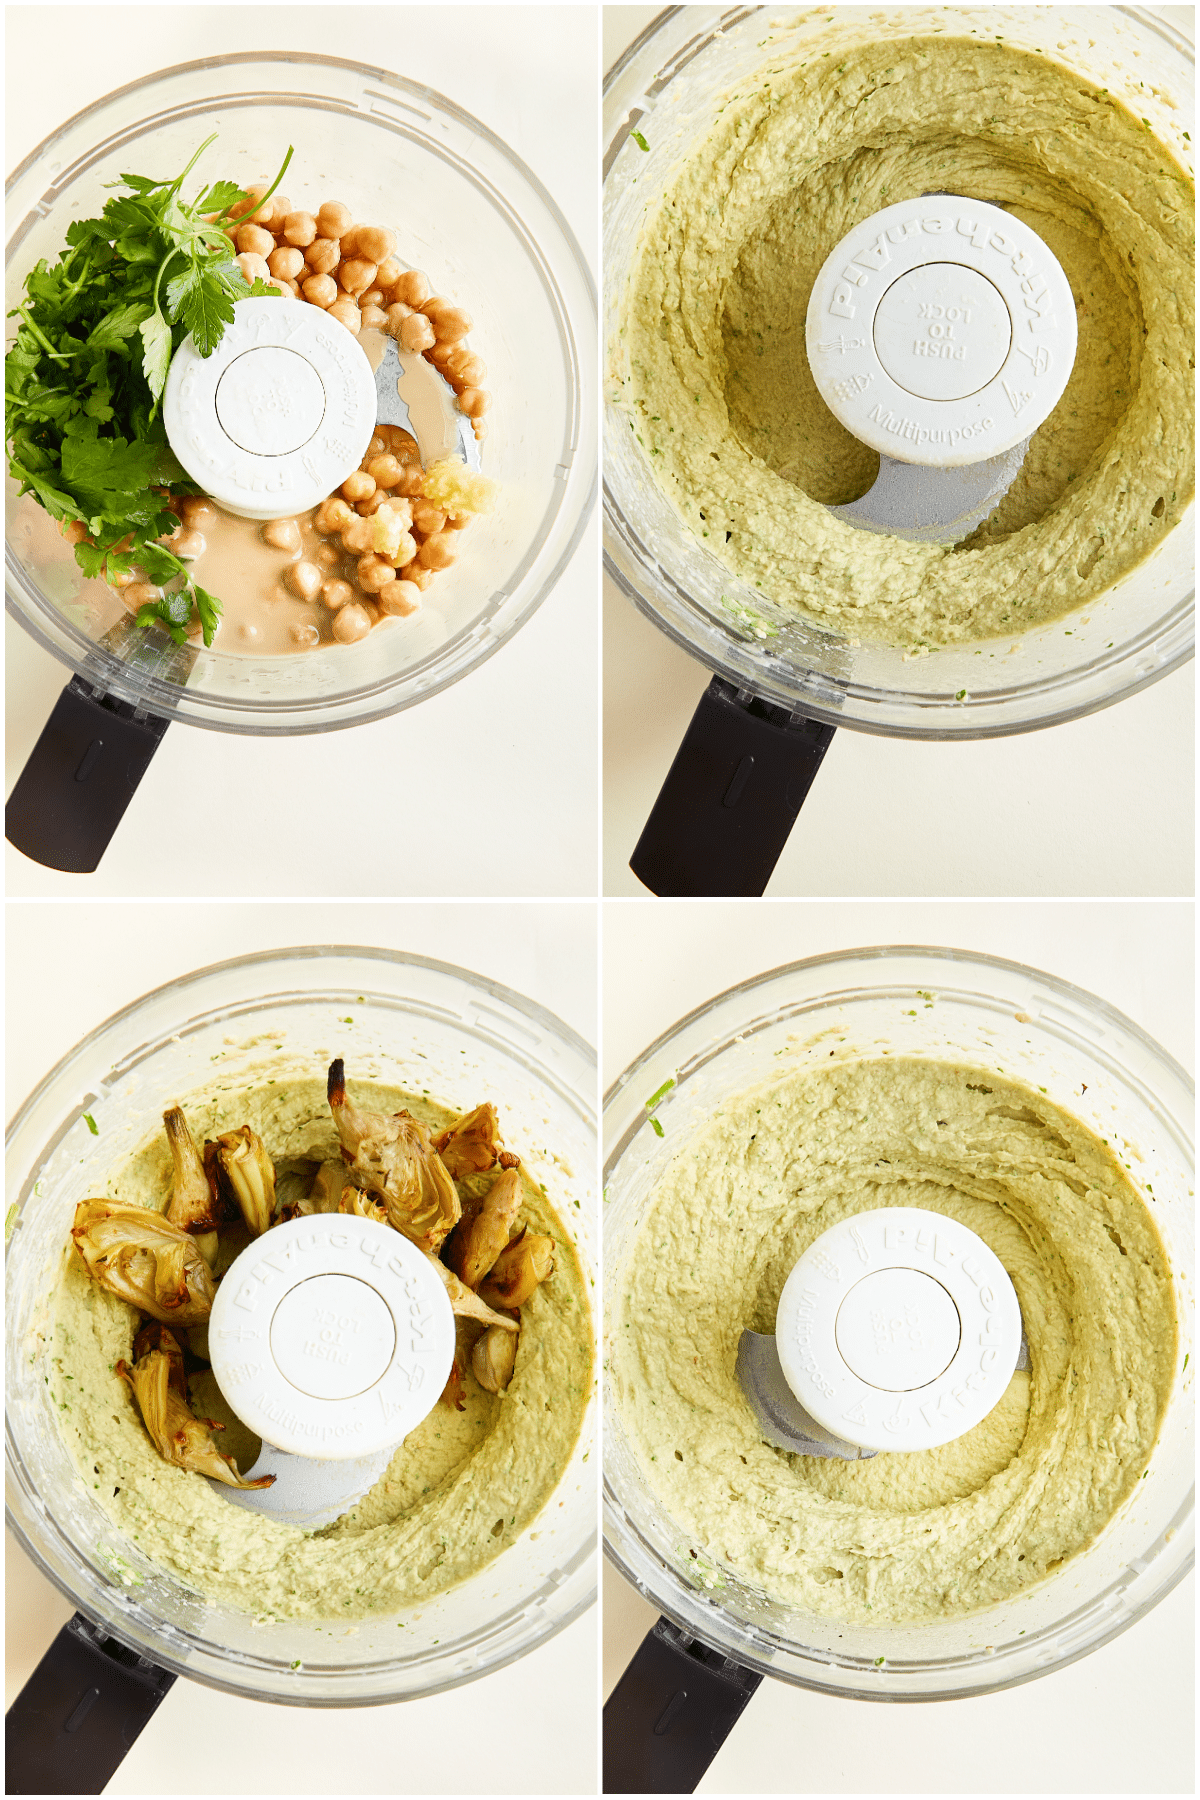 A four image collage showing how to make roasted artichoke lemon hummus: add chickpeas, tahini, spices and herbs to a food processor and blend. Add roasted artichokes and blend again until smooth.